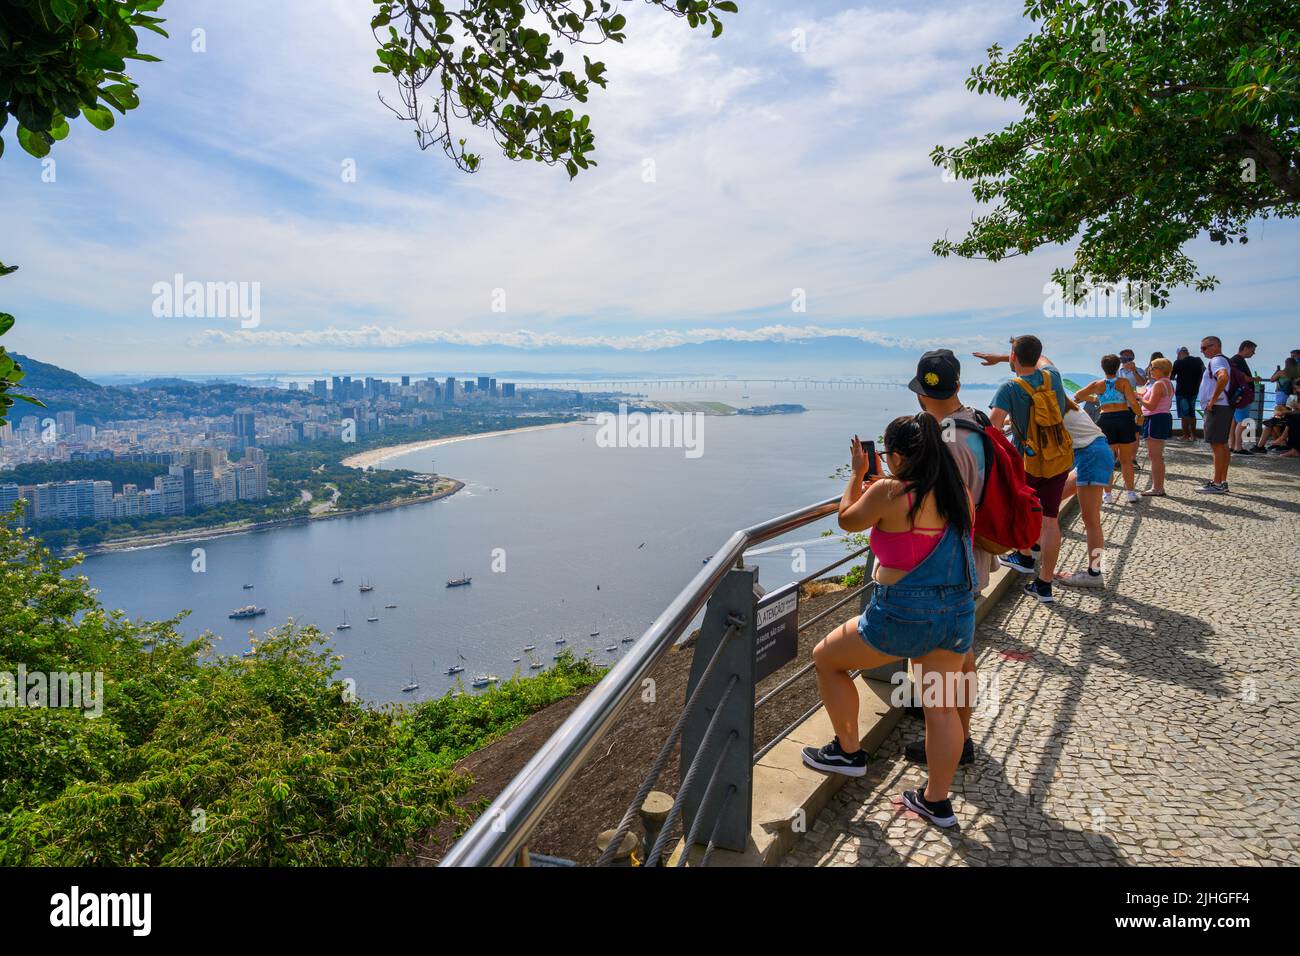 View from Middle station of the Sugarloaf Cable Car, looking over the city, Morro da Urca, Sugarloaf Mountain, Rio de Janeiro, Brazil Stock Photo